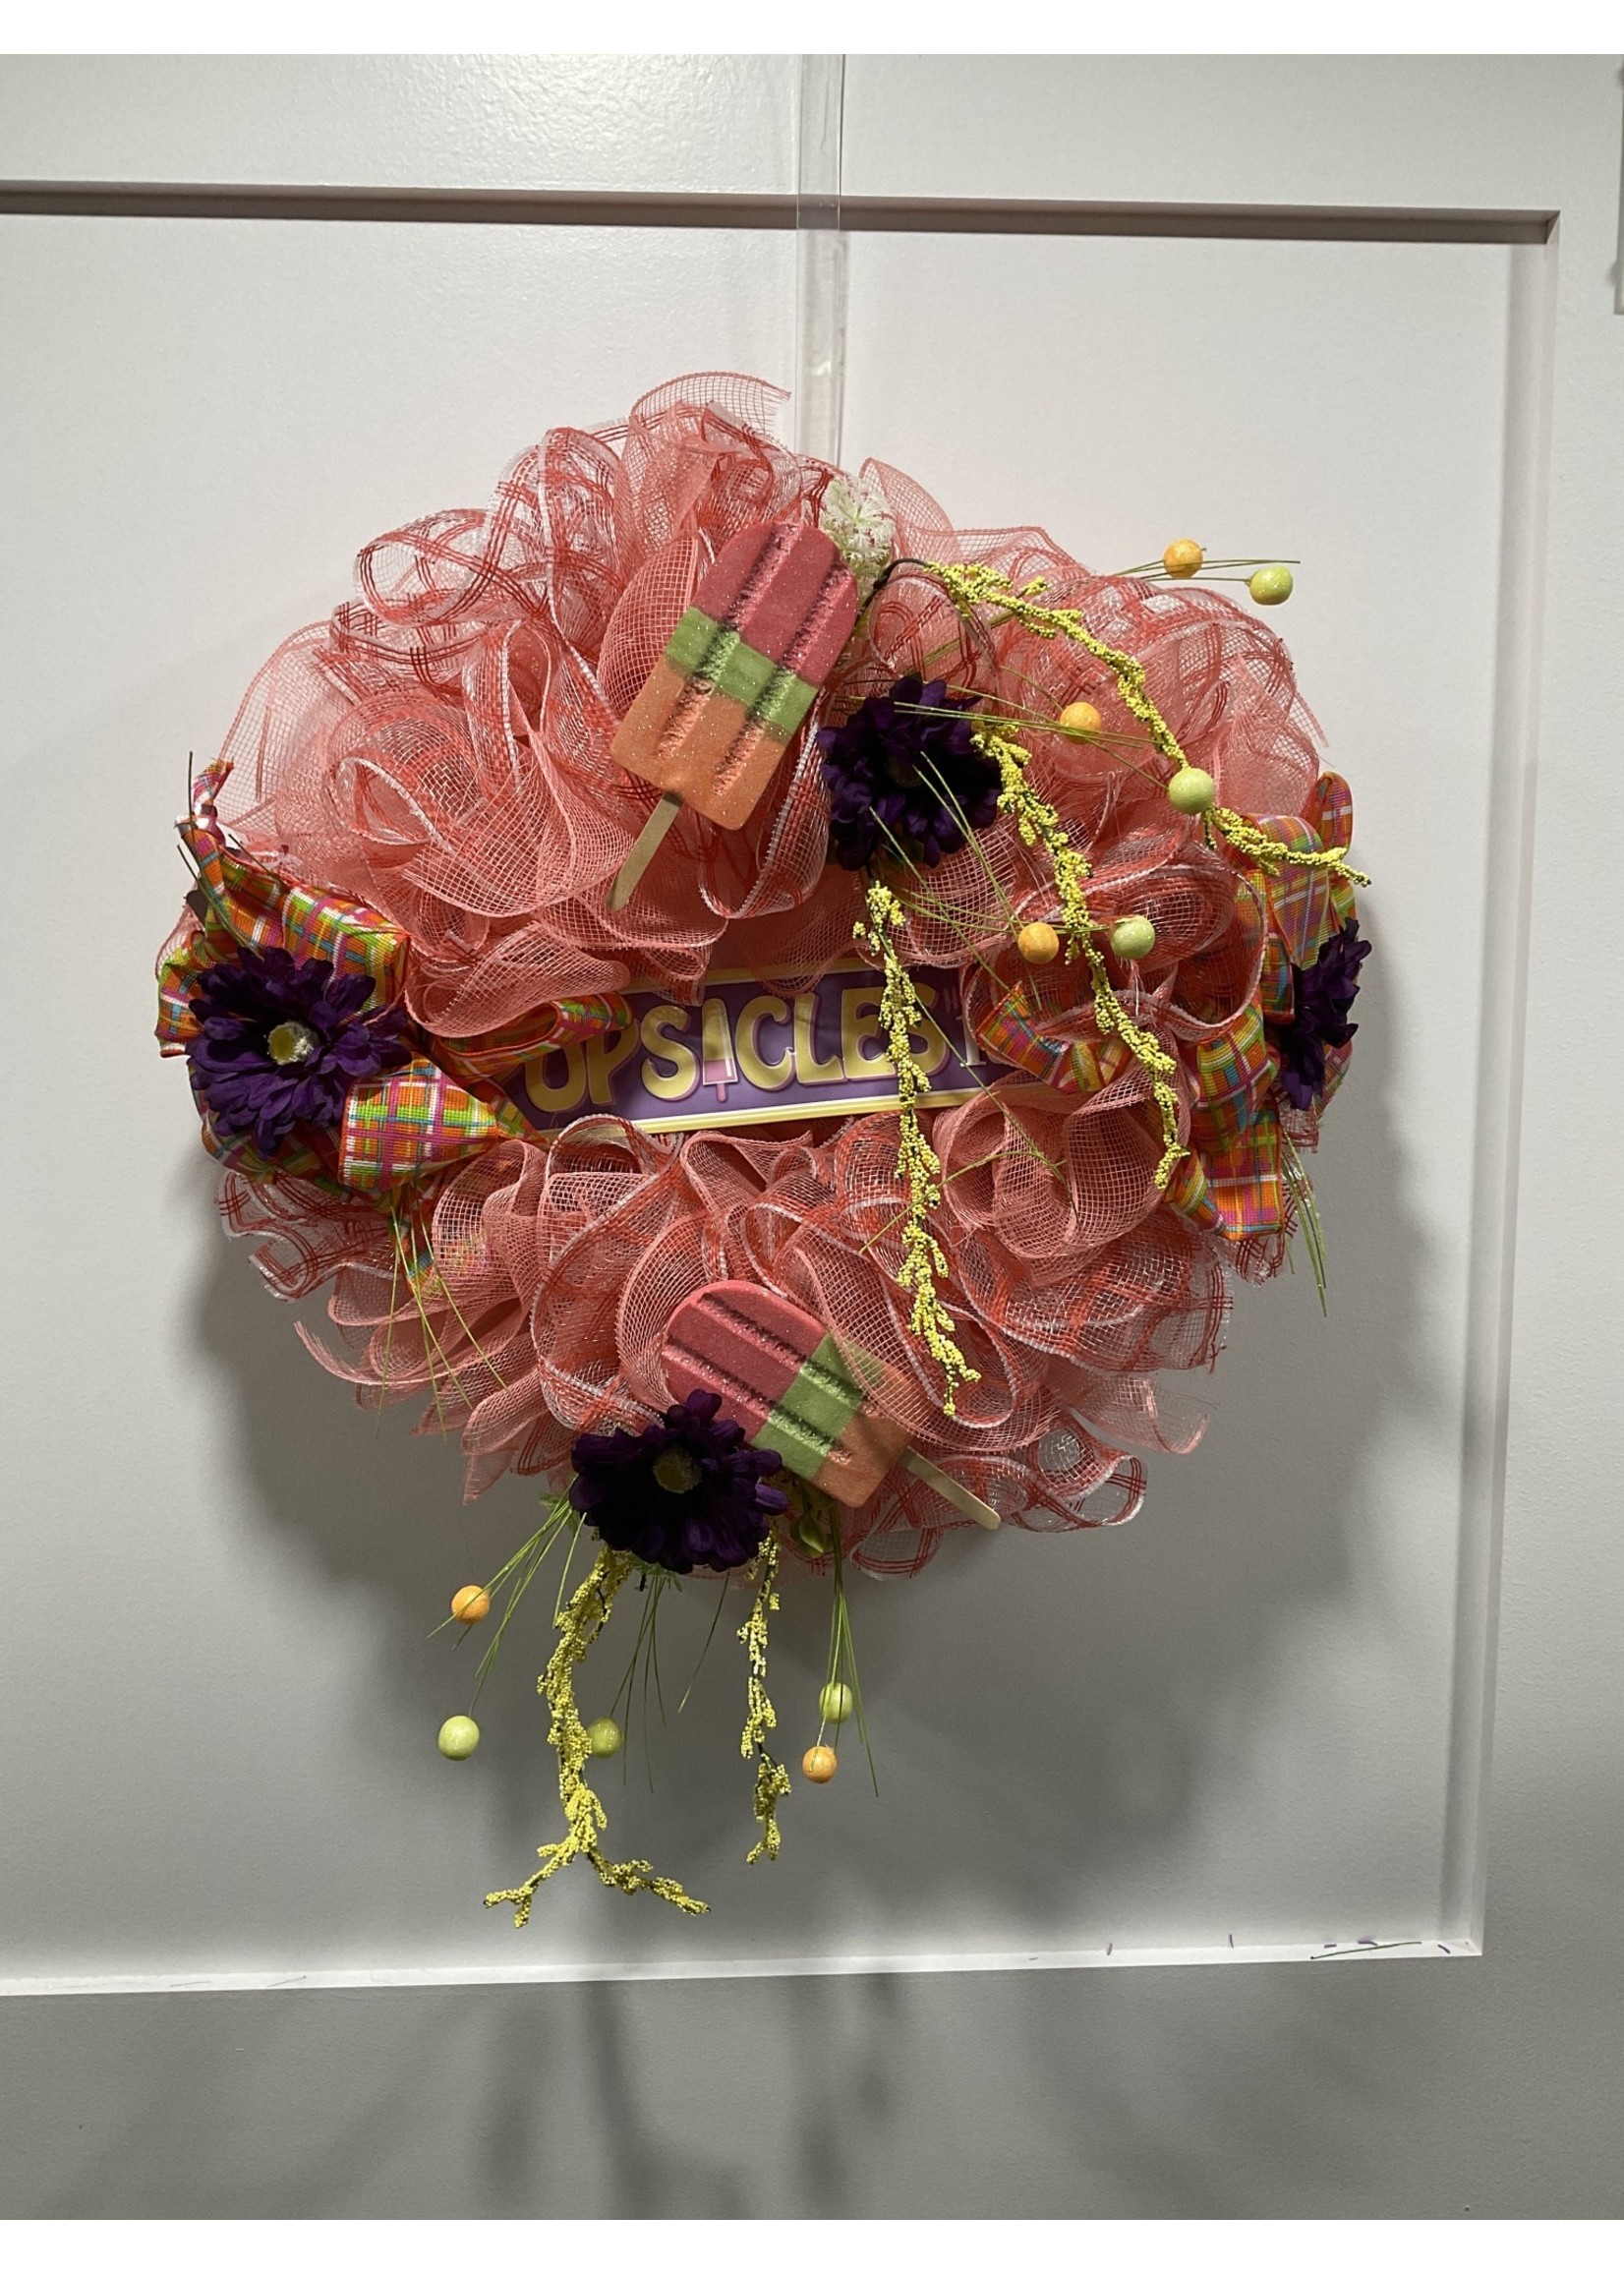 My New Favorite Thing Wreath Mesh 22 in-Peach "Popsicles" w/Popsicles and Purple Flowers